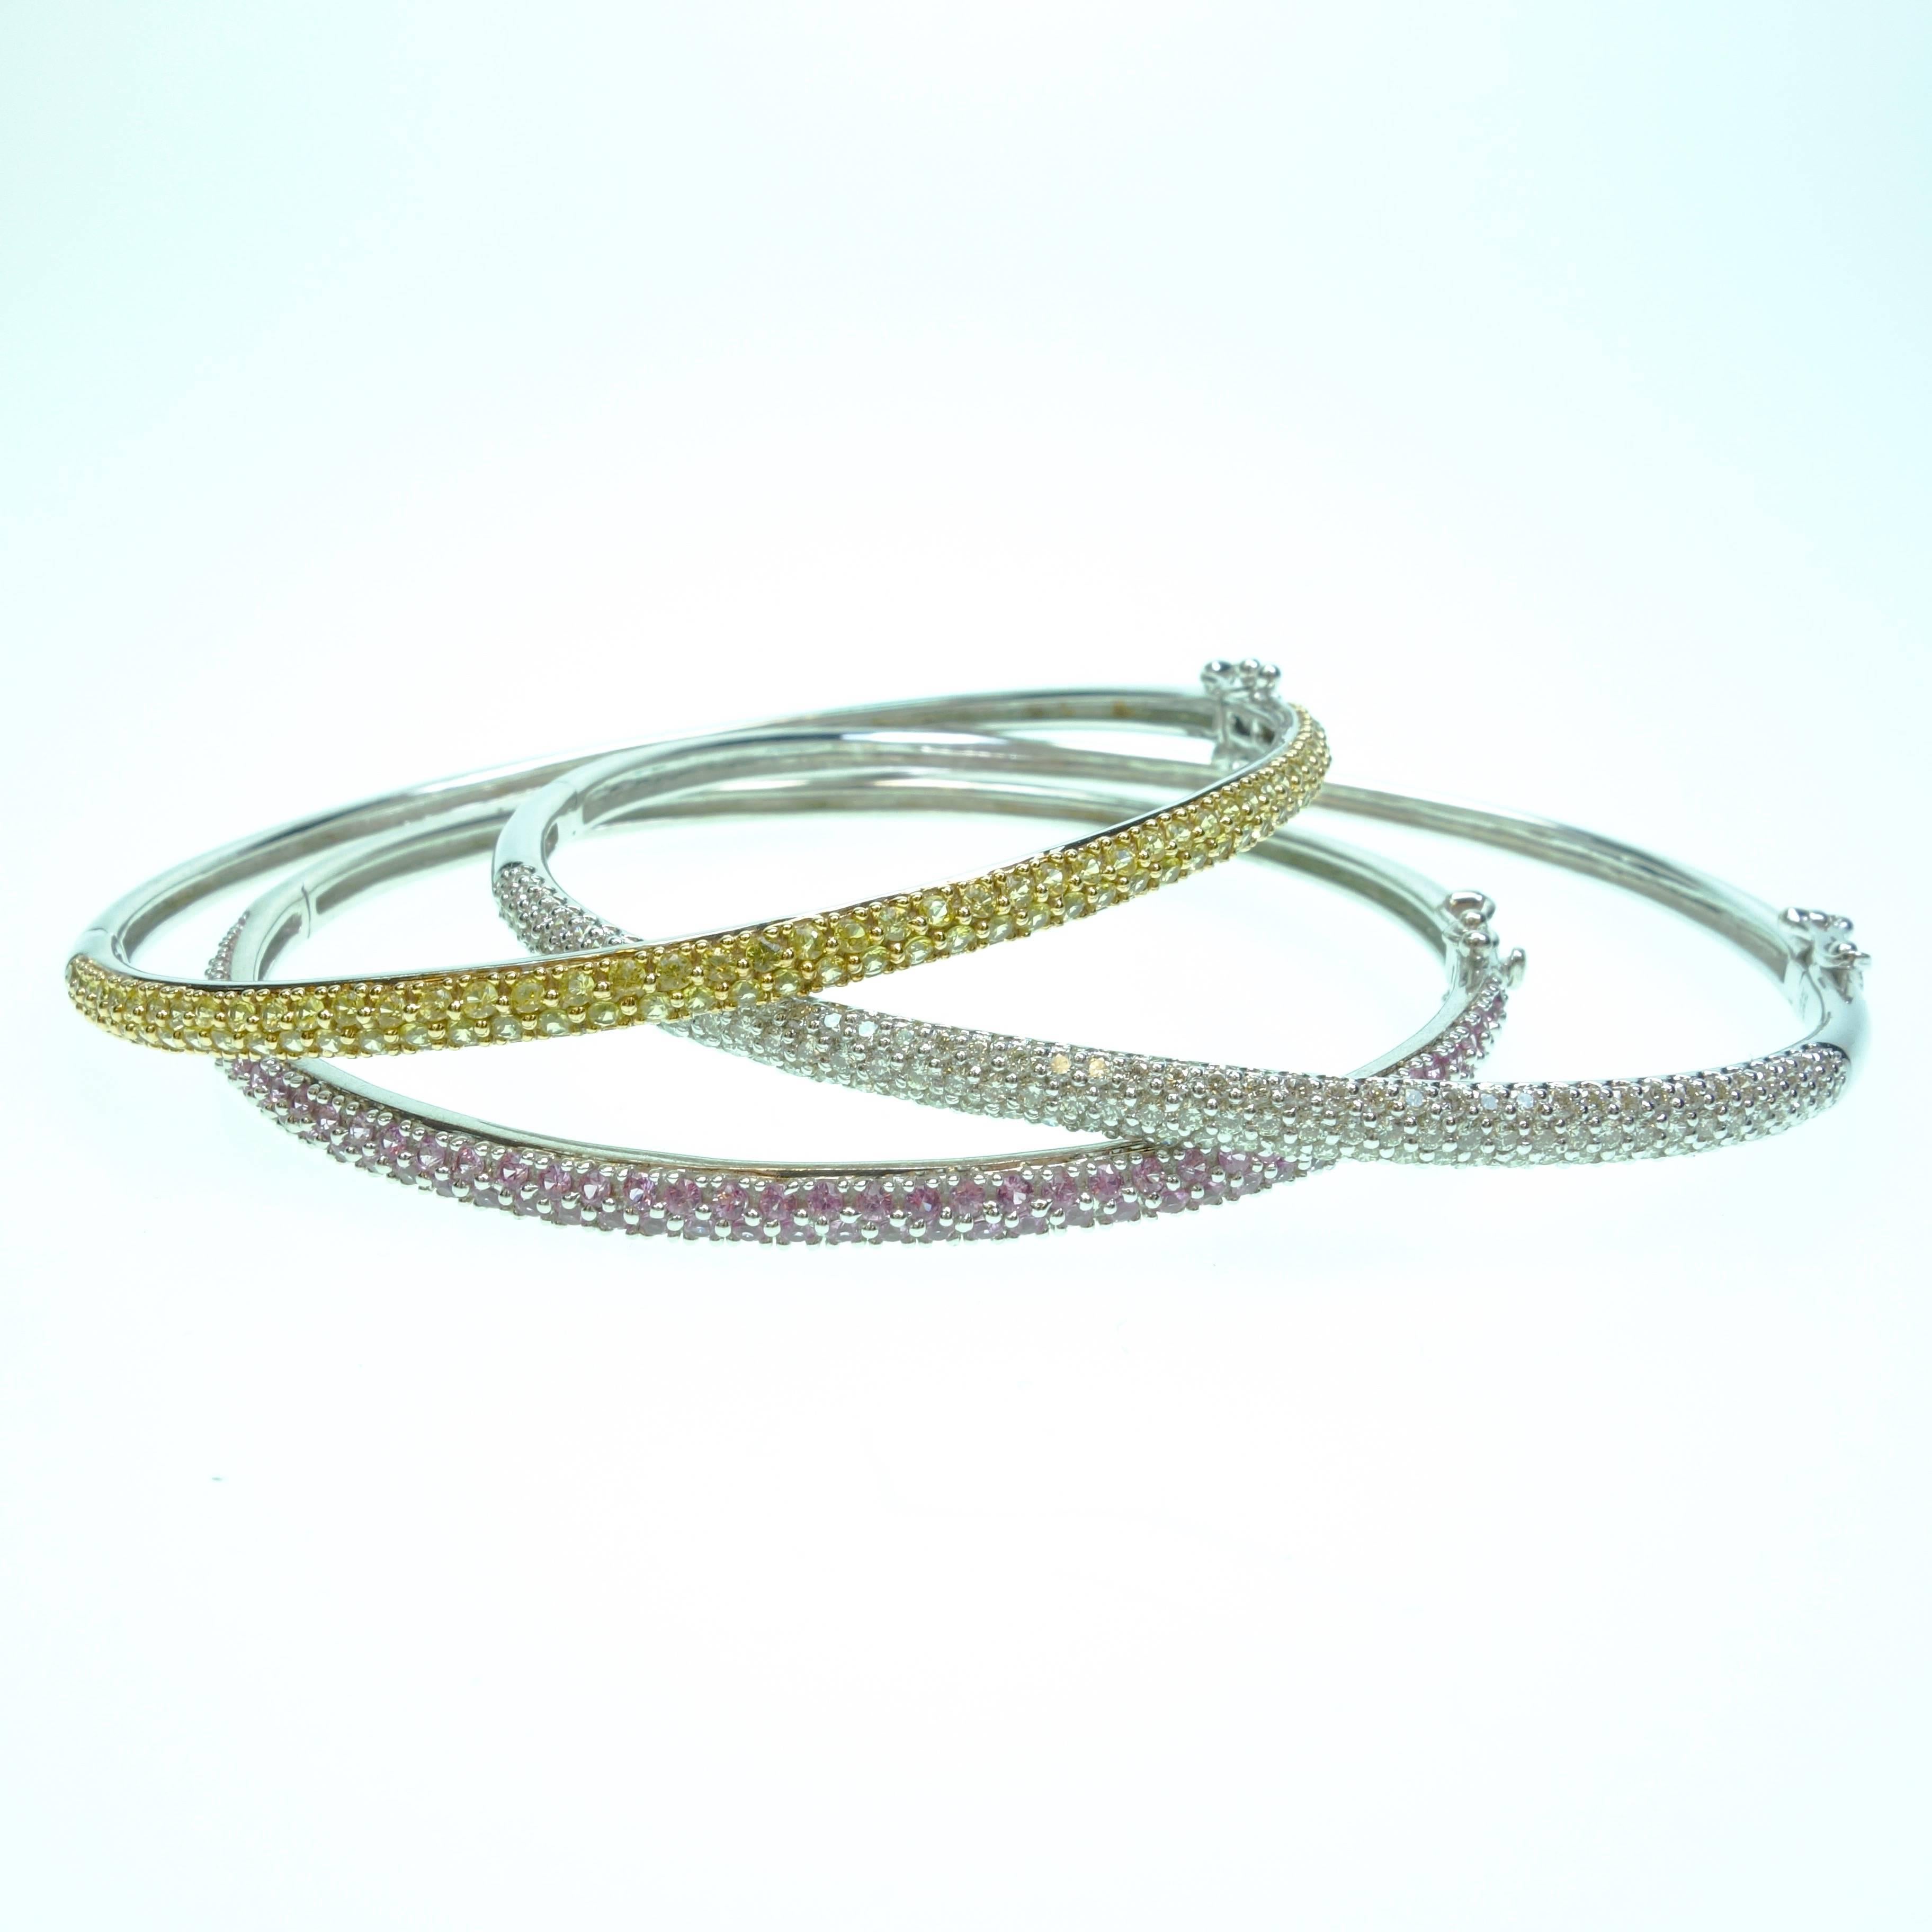 Set of 3 14K white gold pave's set hinged bangle bracelets. 
-One bracelet is set with 96 round cut yellow sapphires, approximate total weight of 1.80ct (6.5